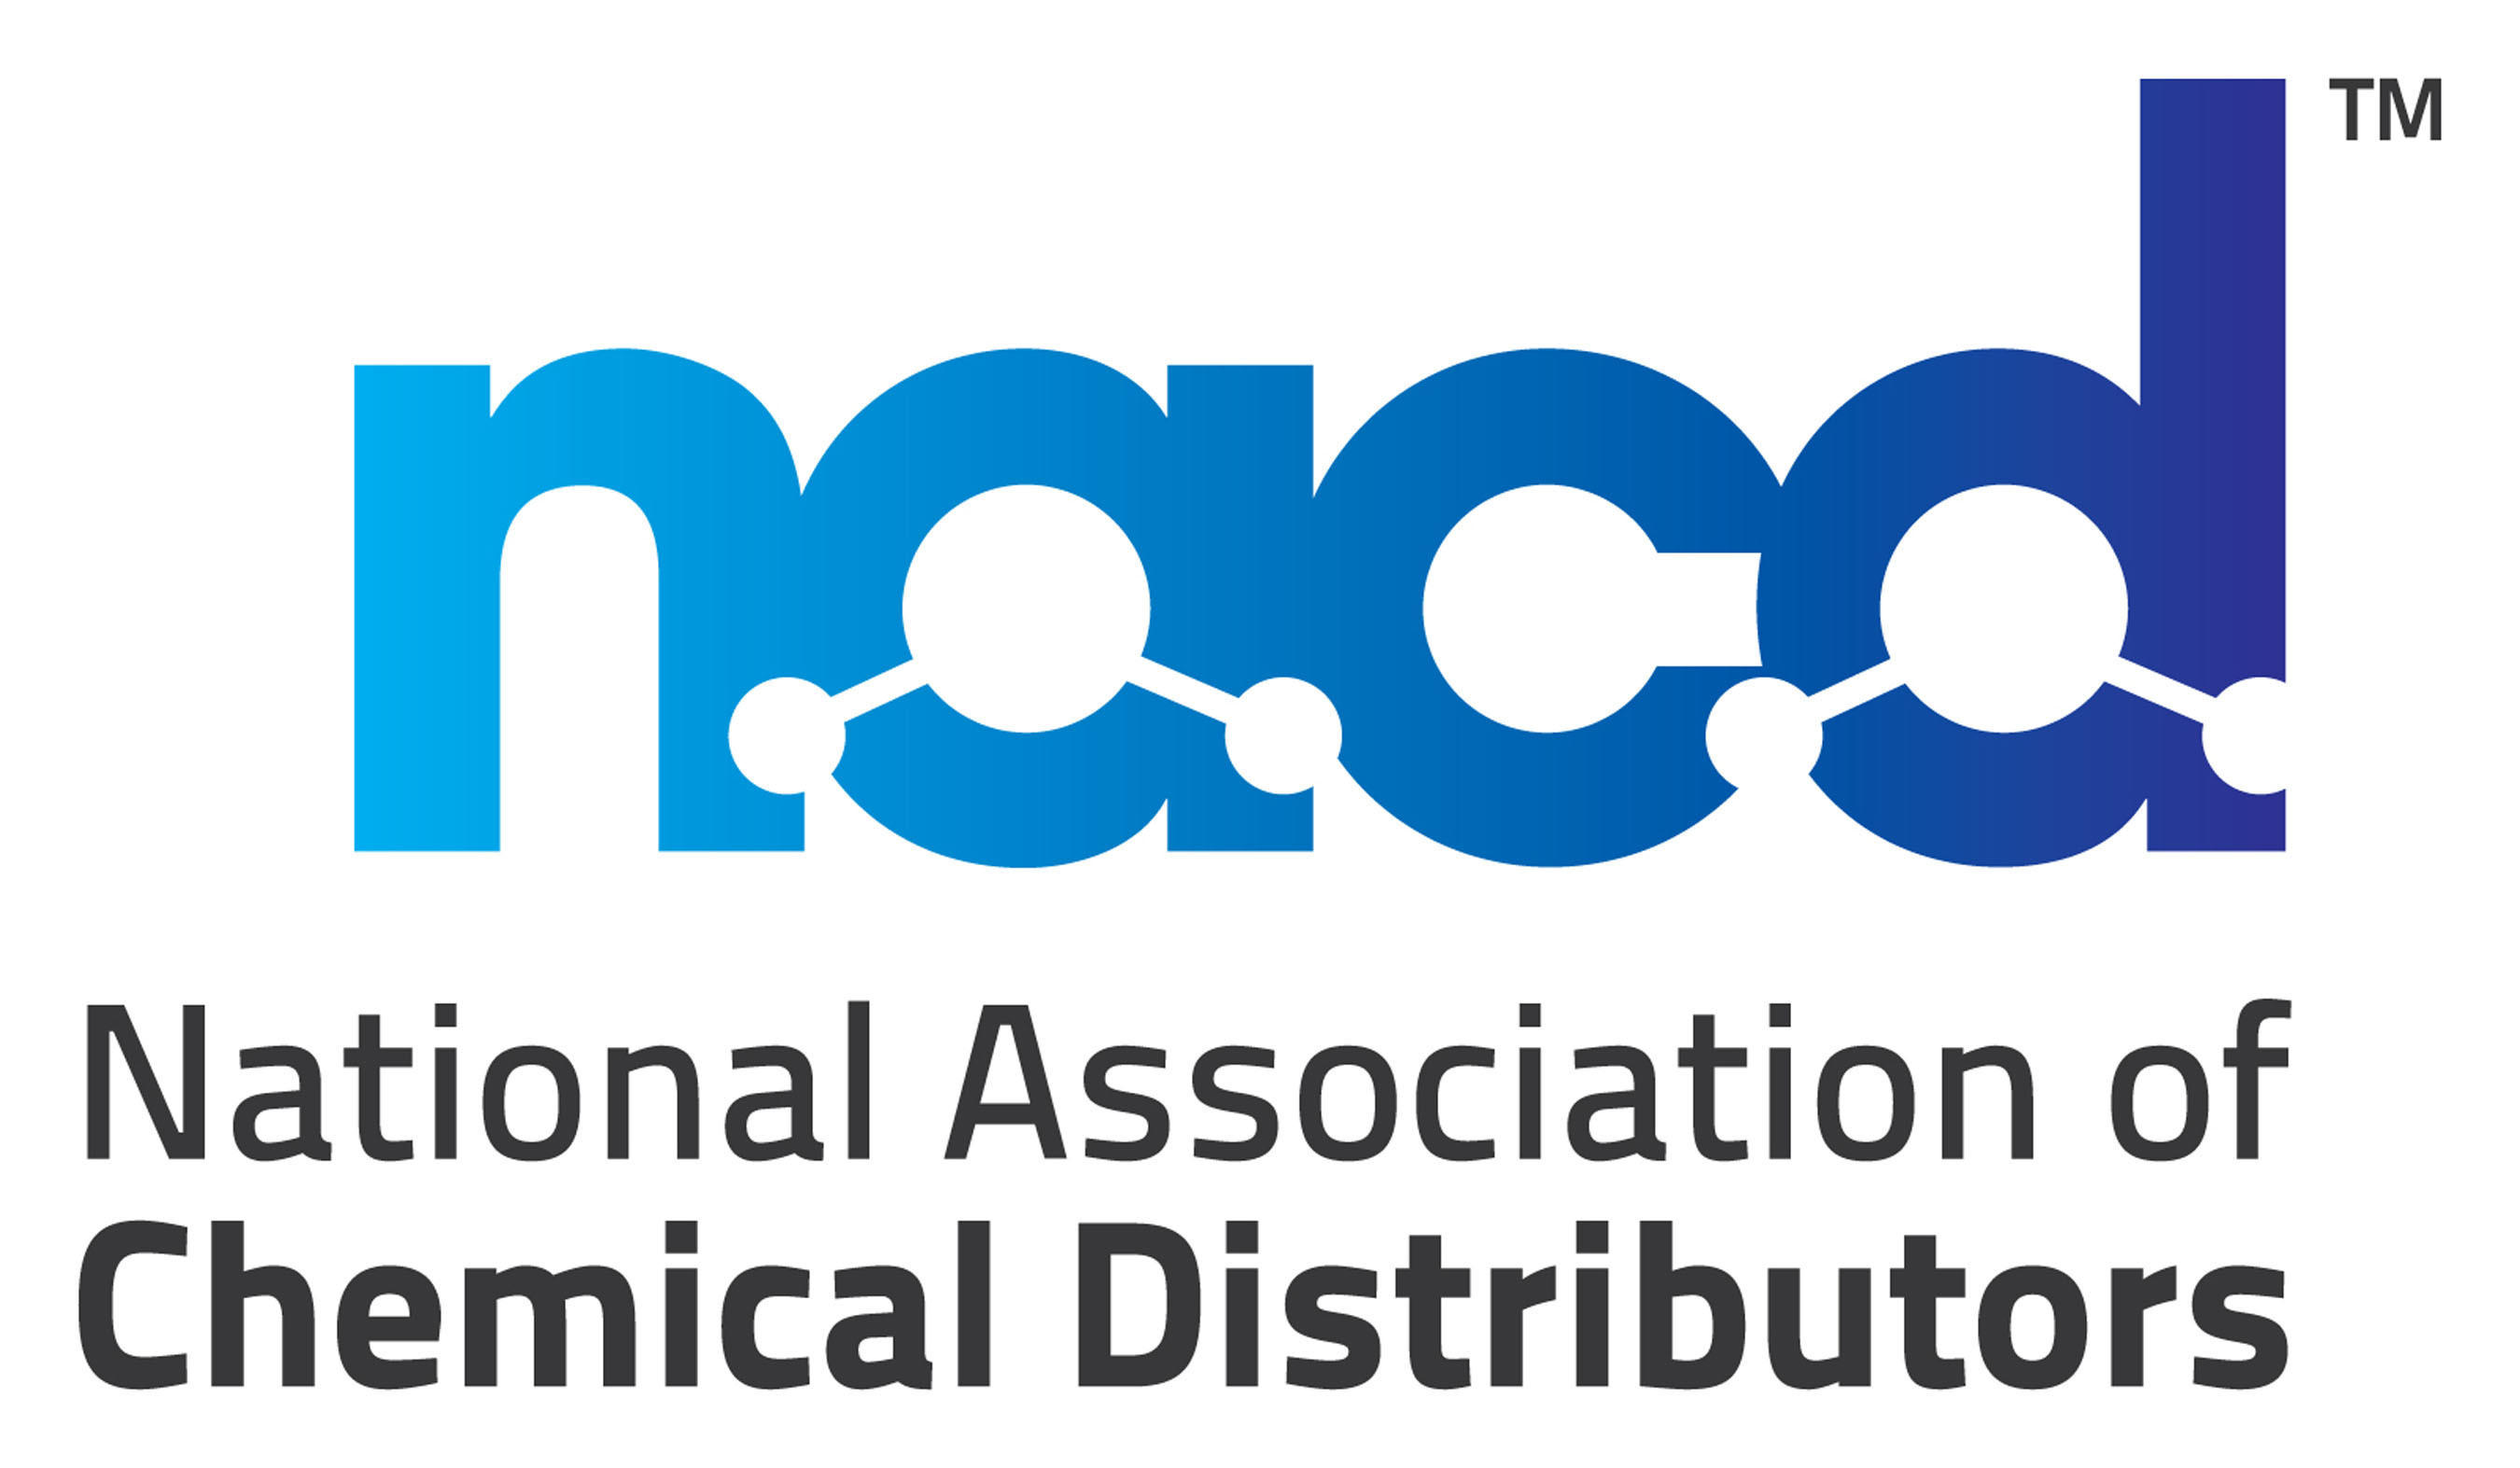 ICC is a member of the National Association of Chemical Distributors